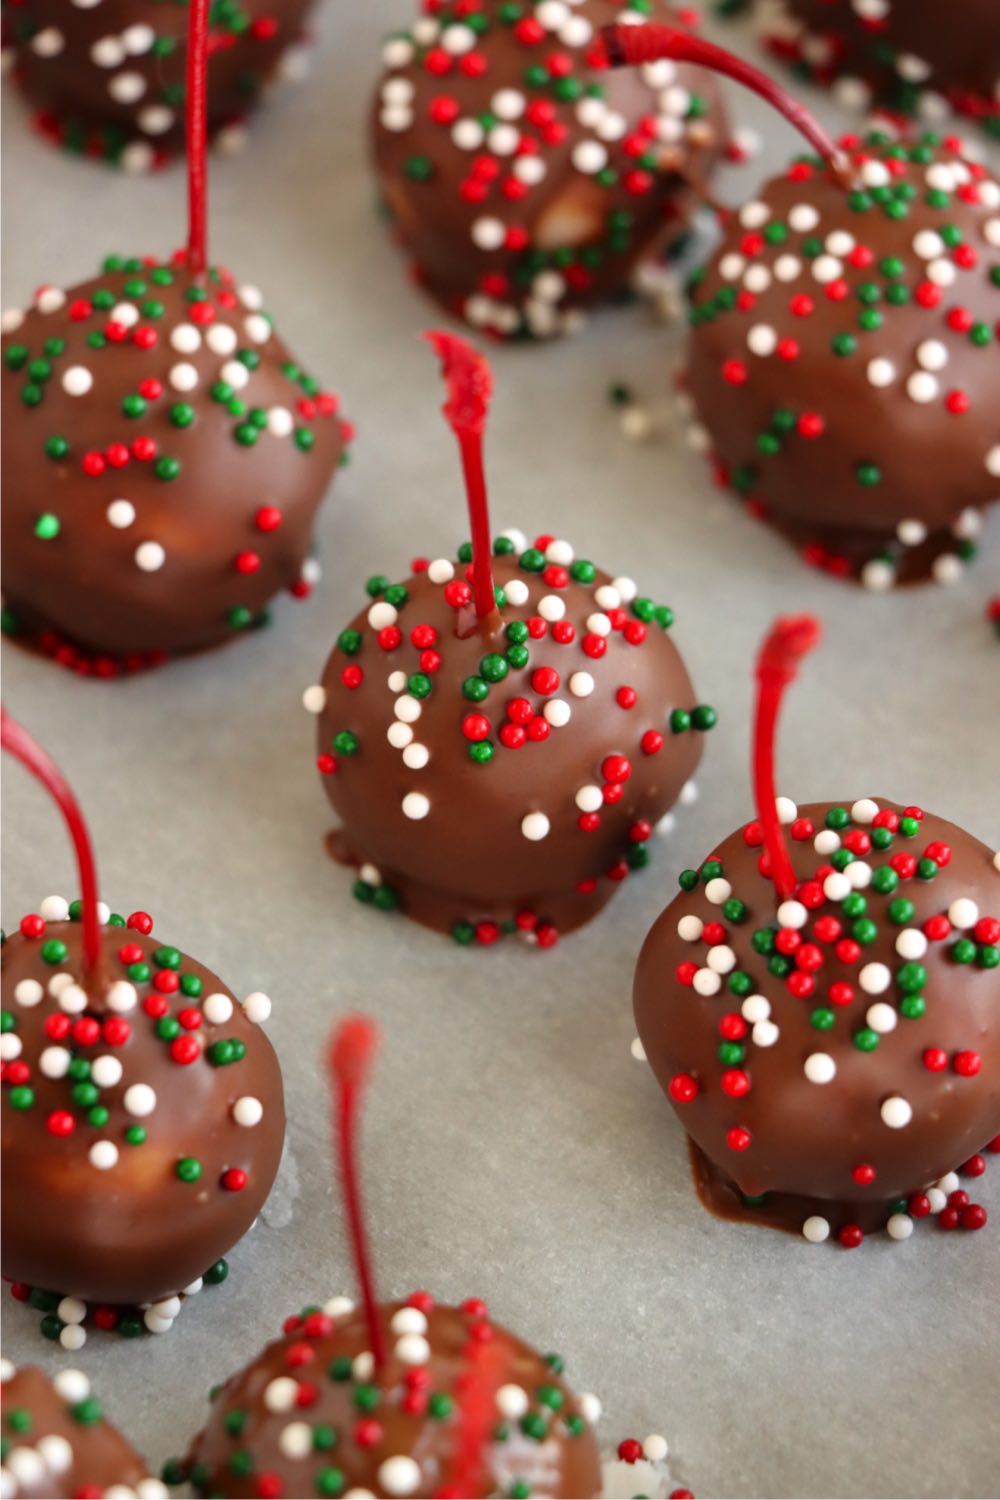 Handmade chocolate covered cherries topped with sprinkles